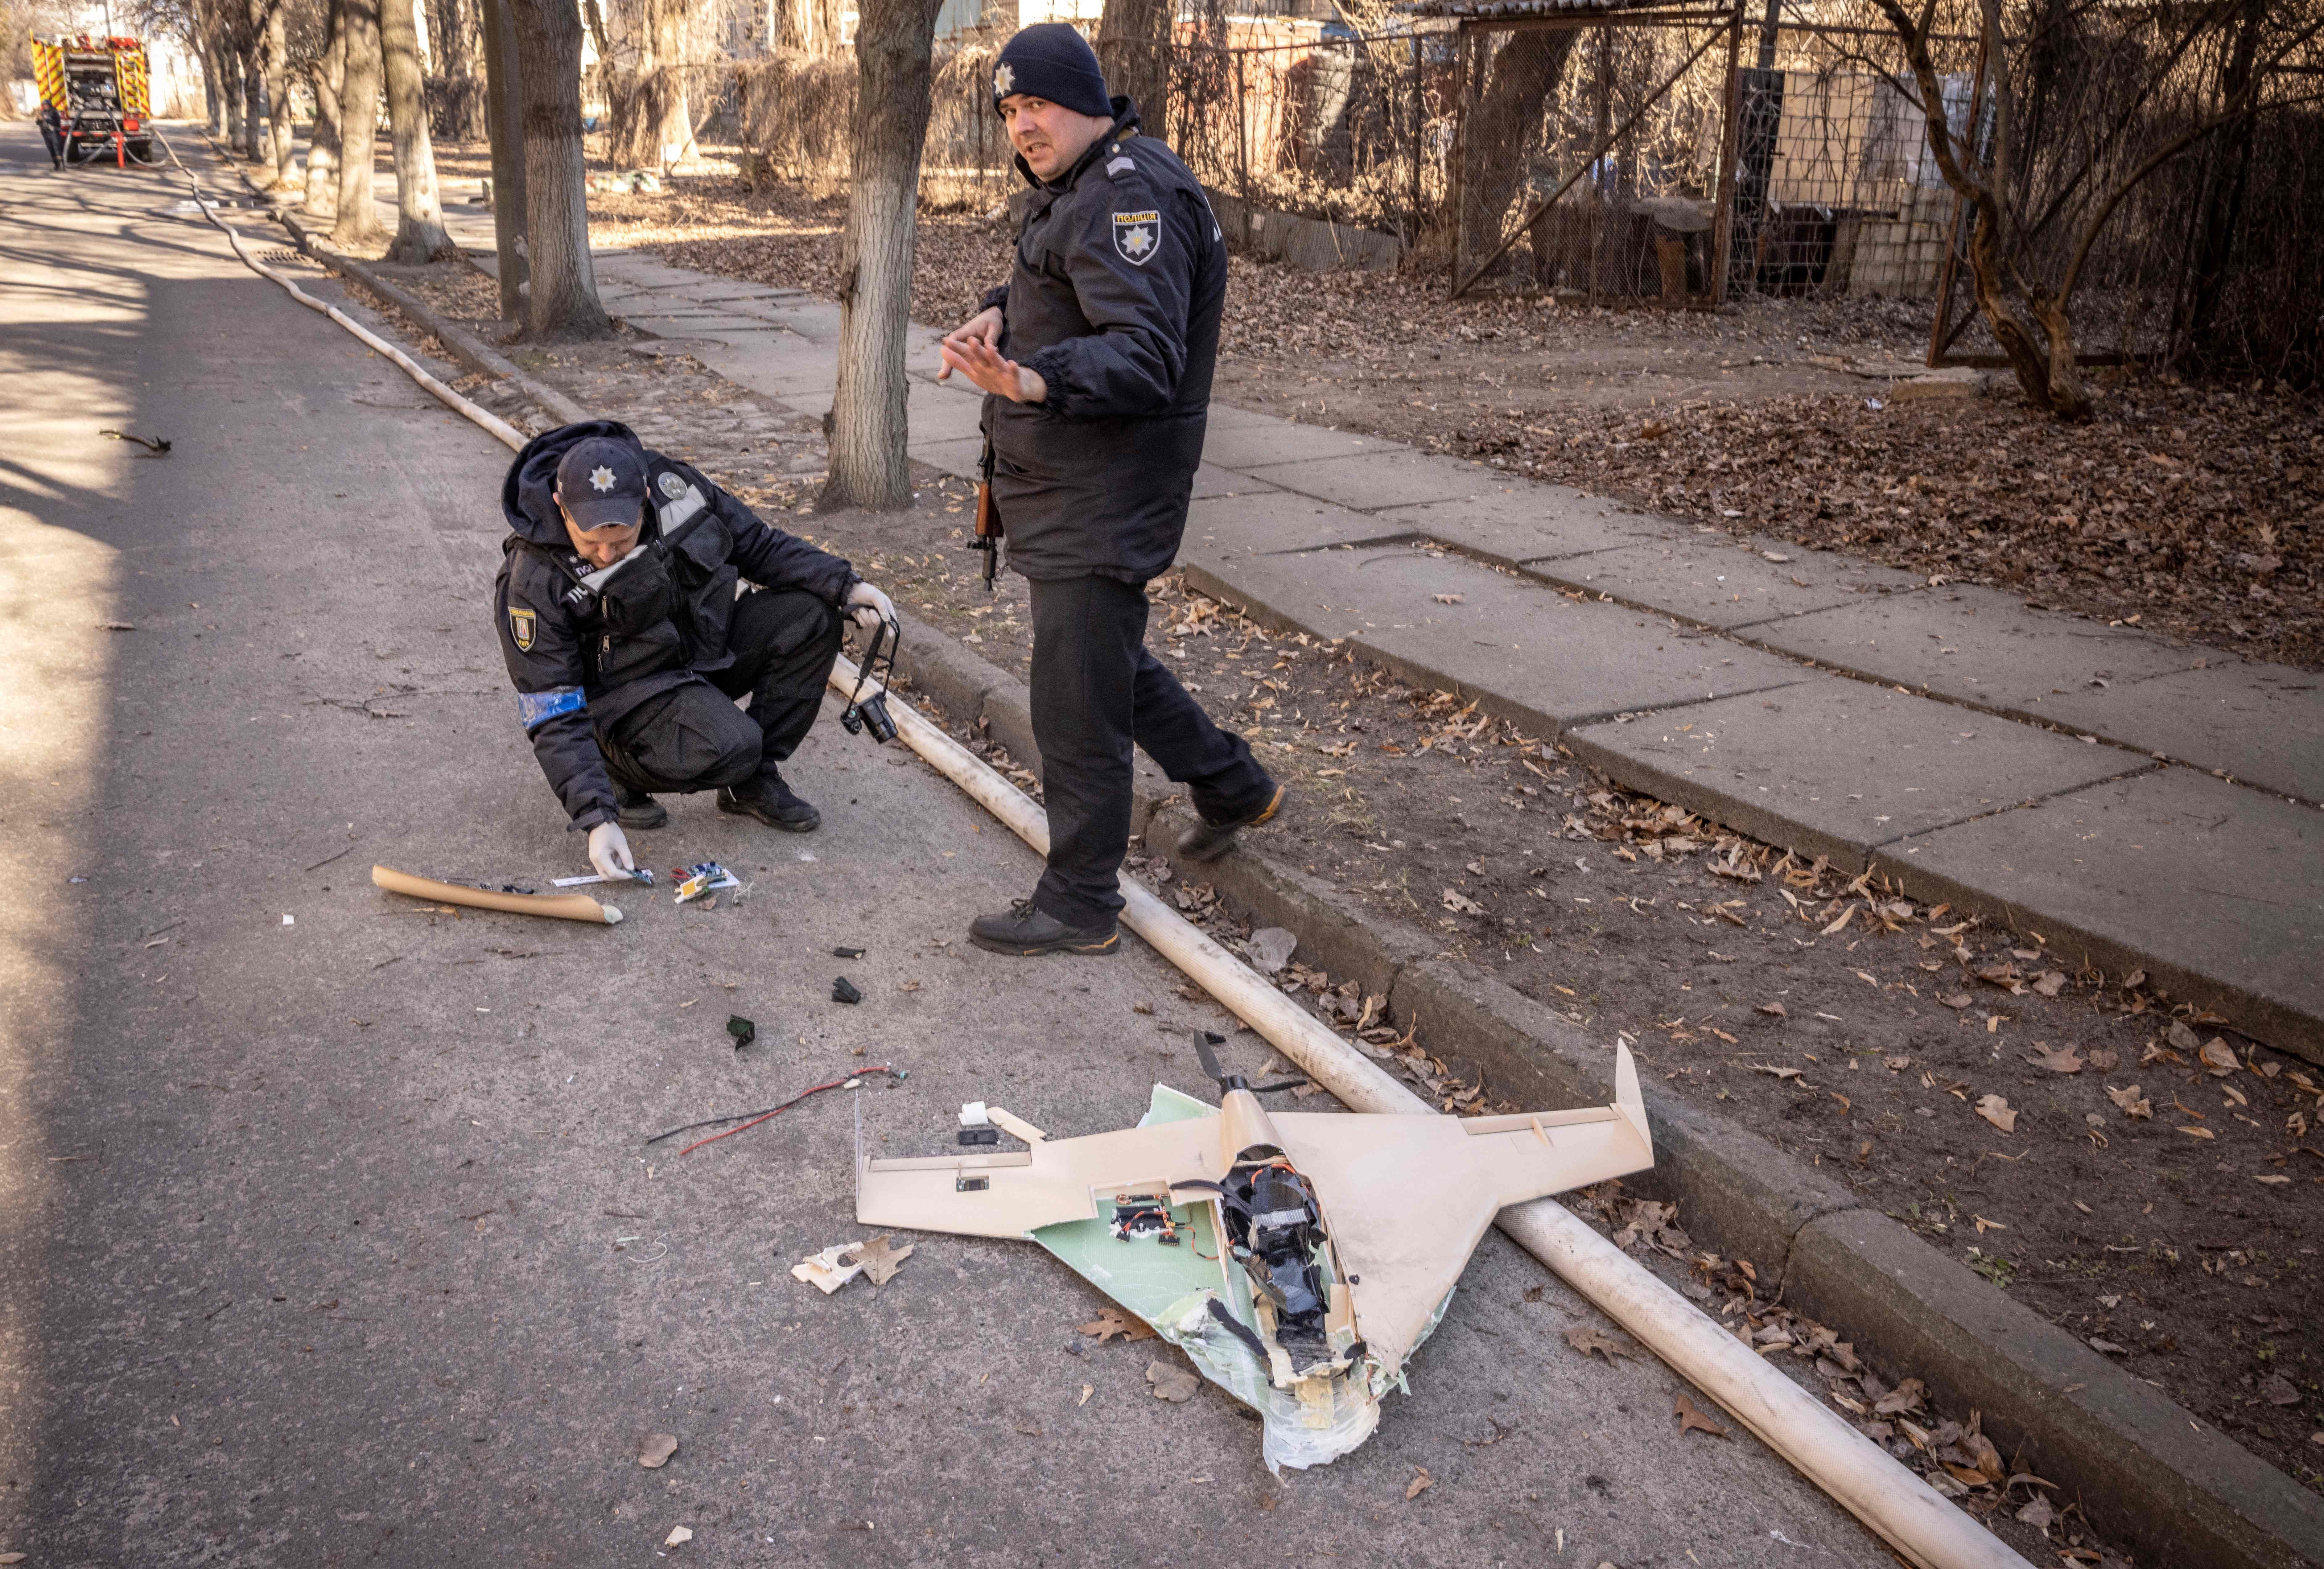 Ukrainian police officers inspect a downed Russian drone in the area of a research institute, part of Ukraine's National Academy of Science, after a strike, in northwestern Kyiv, on March 22.